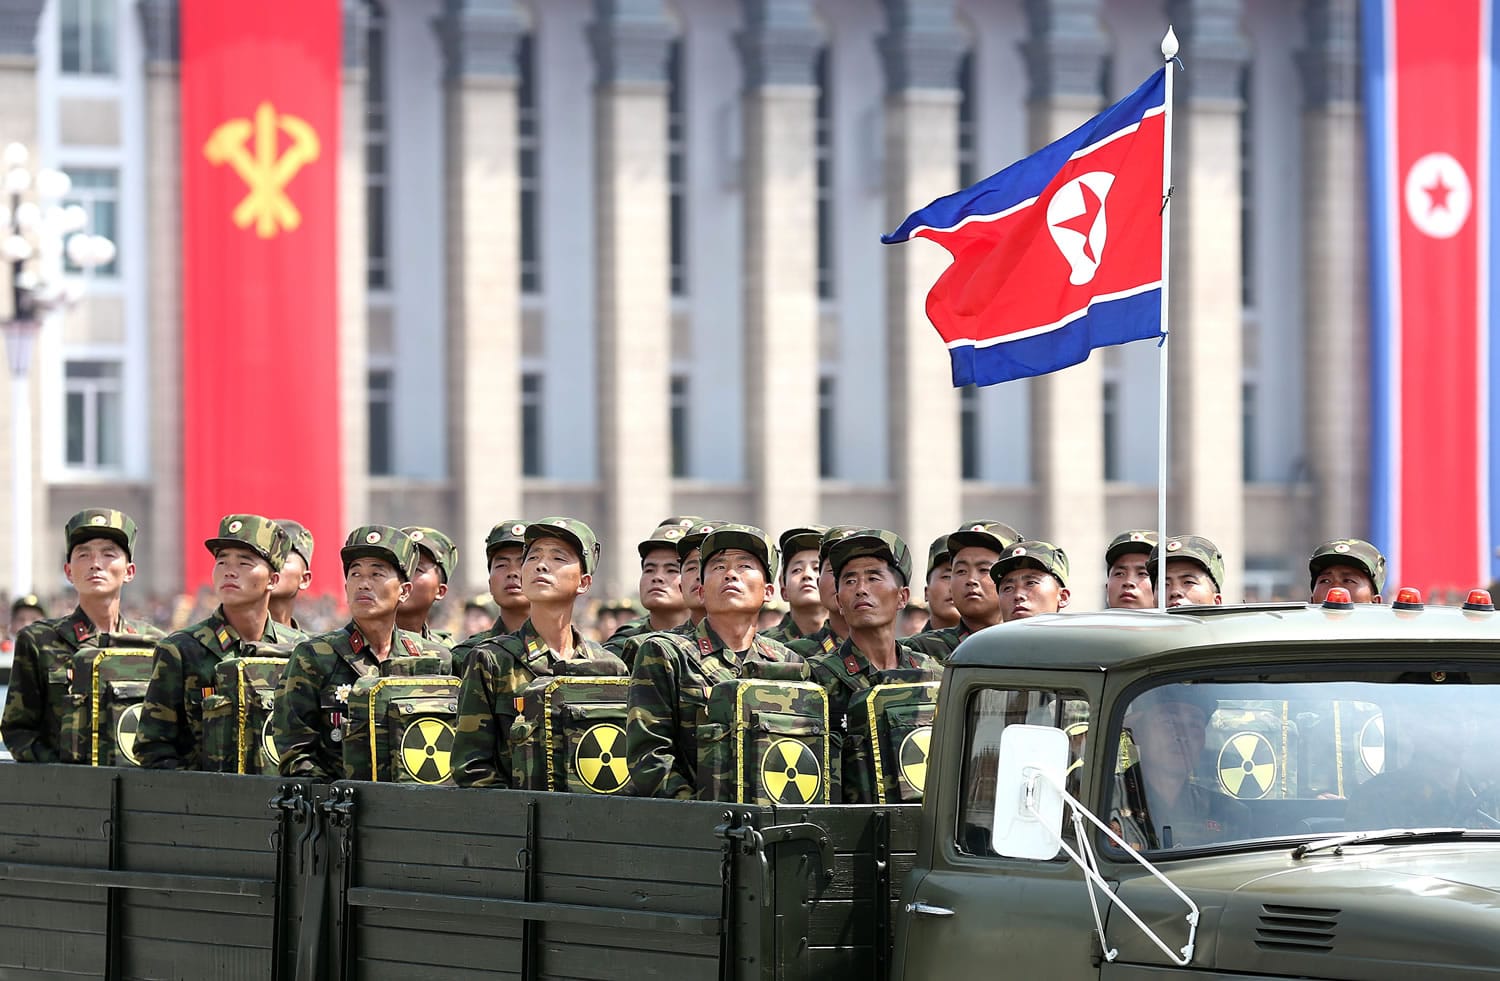 North Korean soldiers turn and look towards leader Kim Jong Un on July 27, 2013 as they carry packs marked with the nuclear symbol during a parade marking the 60th anniversary of the Korean War armistice in Pyongyang, North Korea. It?s a single image released by an enormous propaganda apparatus, showing a note handwritten by a dictator. And it contains a telling clue to the mindset behind what has become the biggest story in Asia: North Korea?s surprise and disputed claim to have tested its first hydrogen bomb.